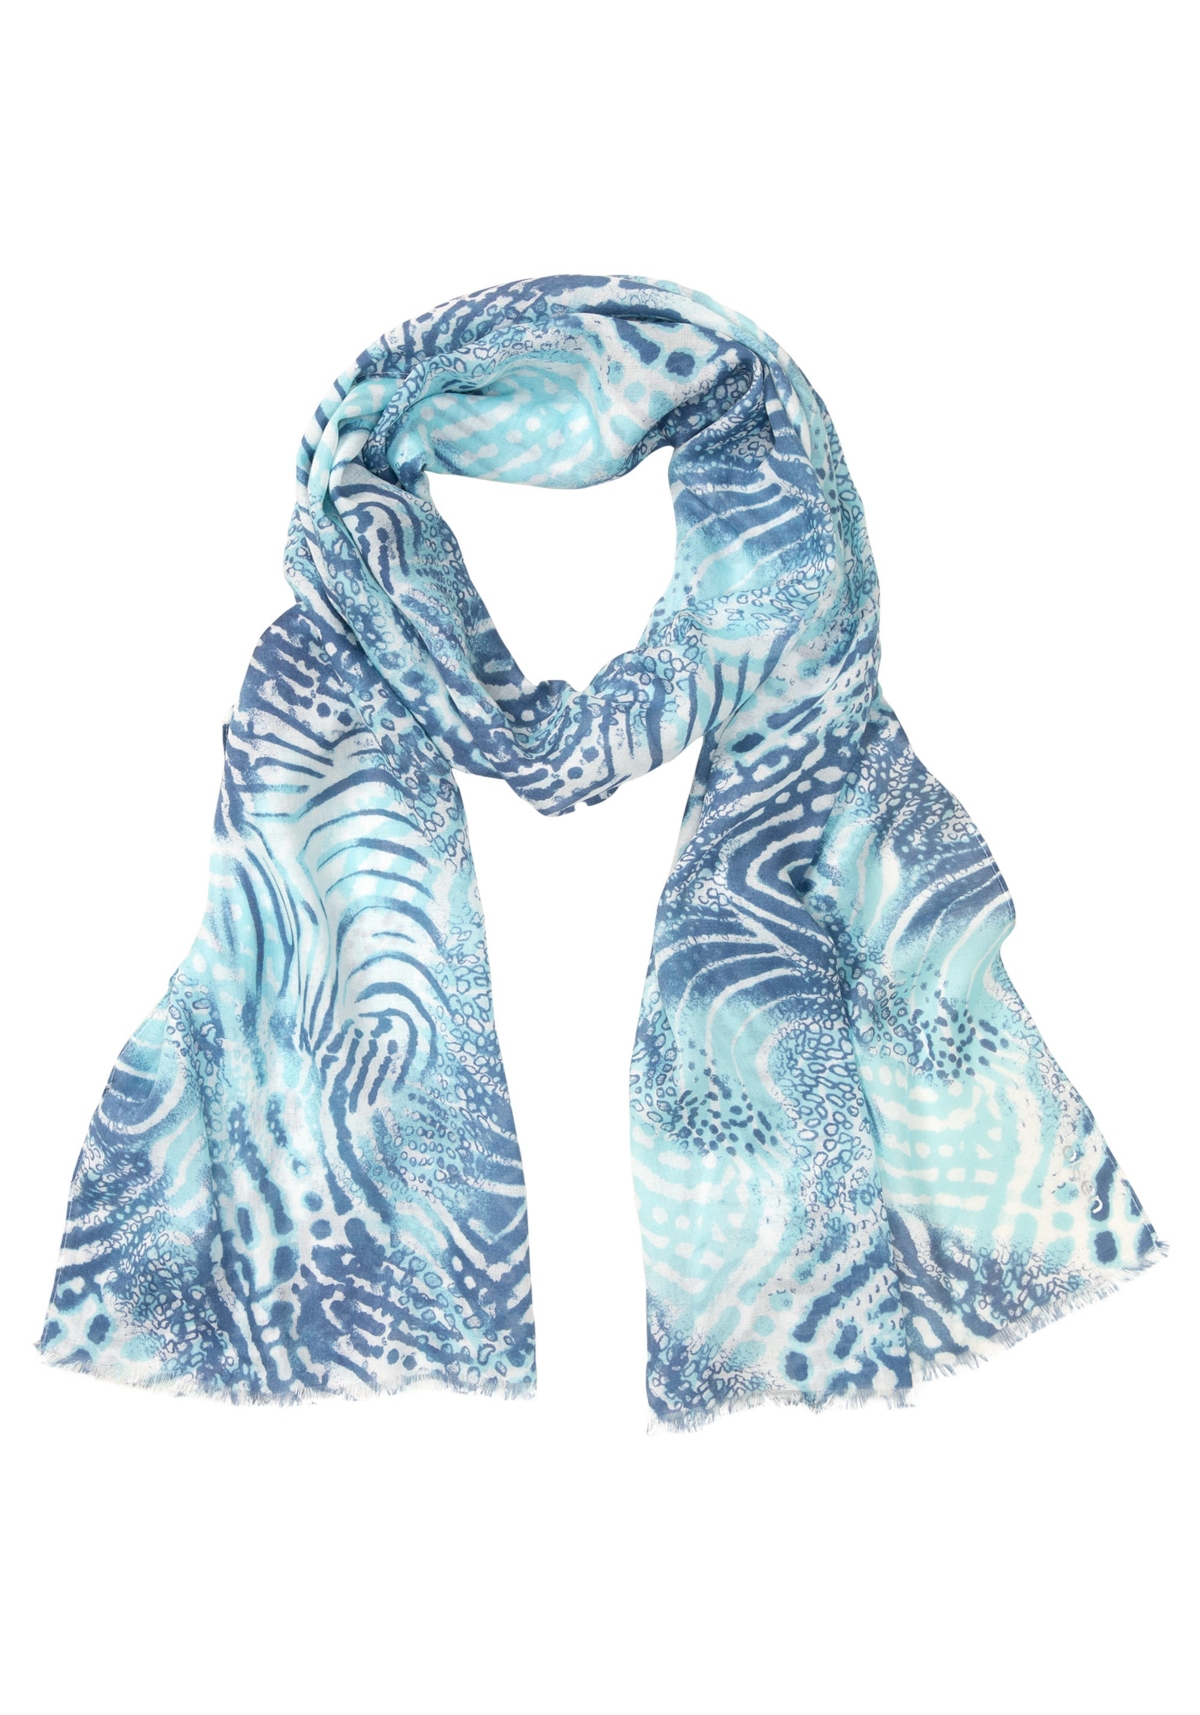 Water Print Scarf with Frayed Edge Trim - Light turquoise